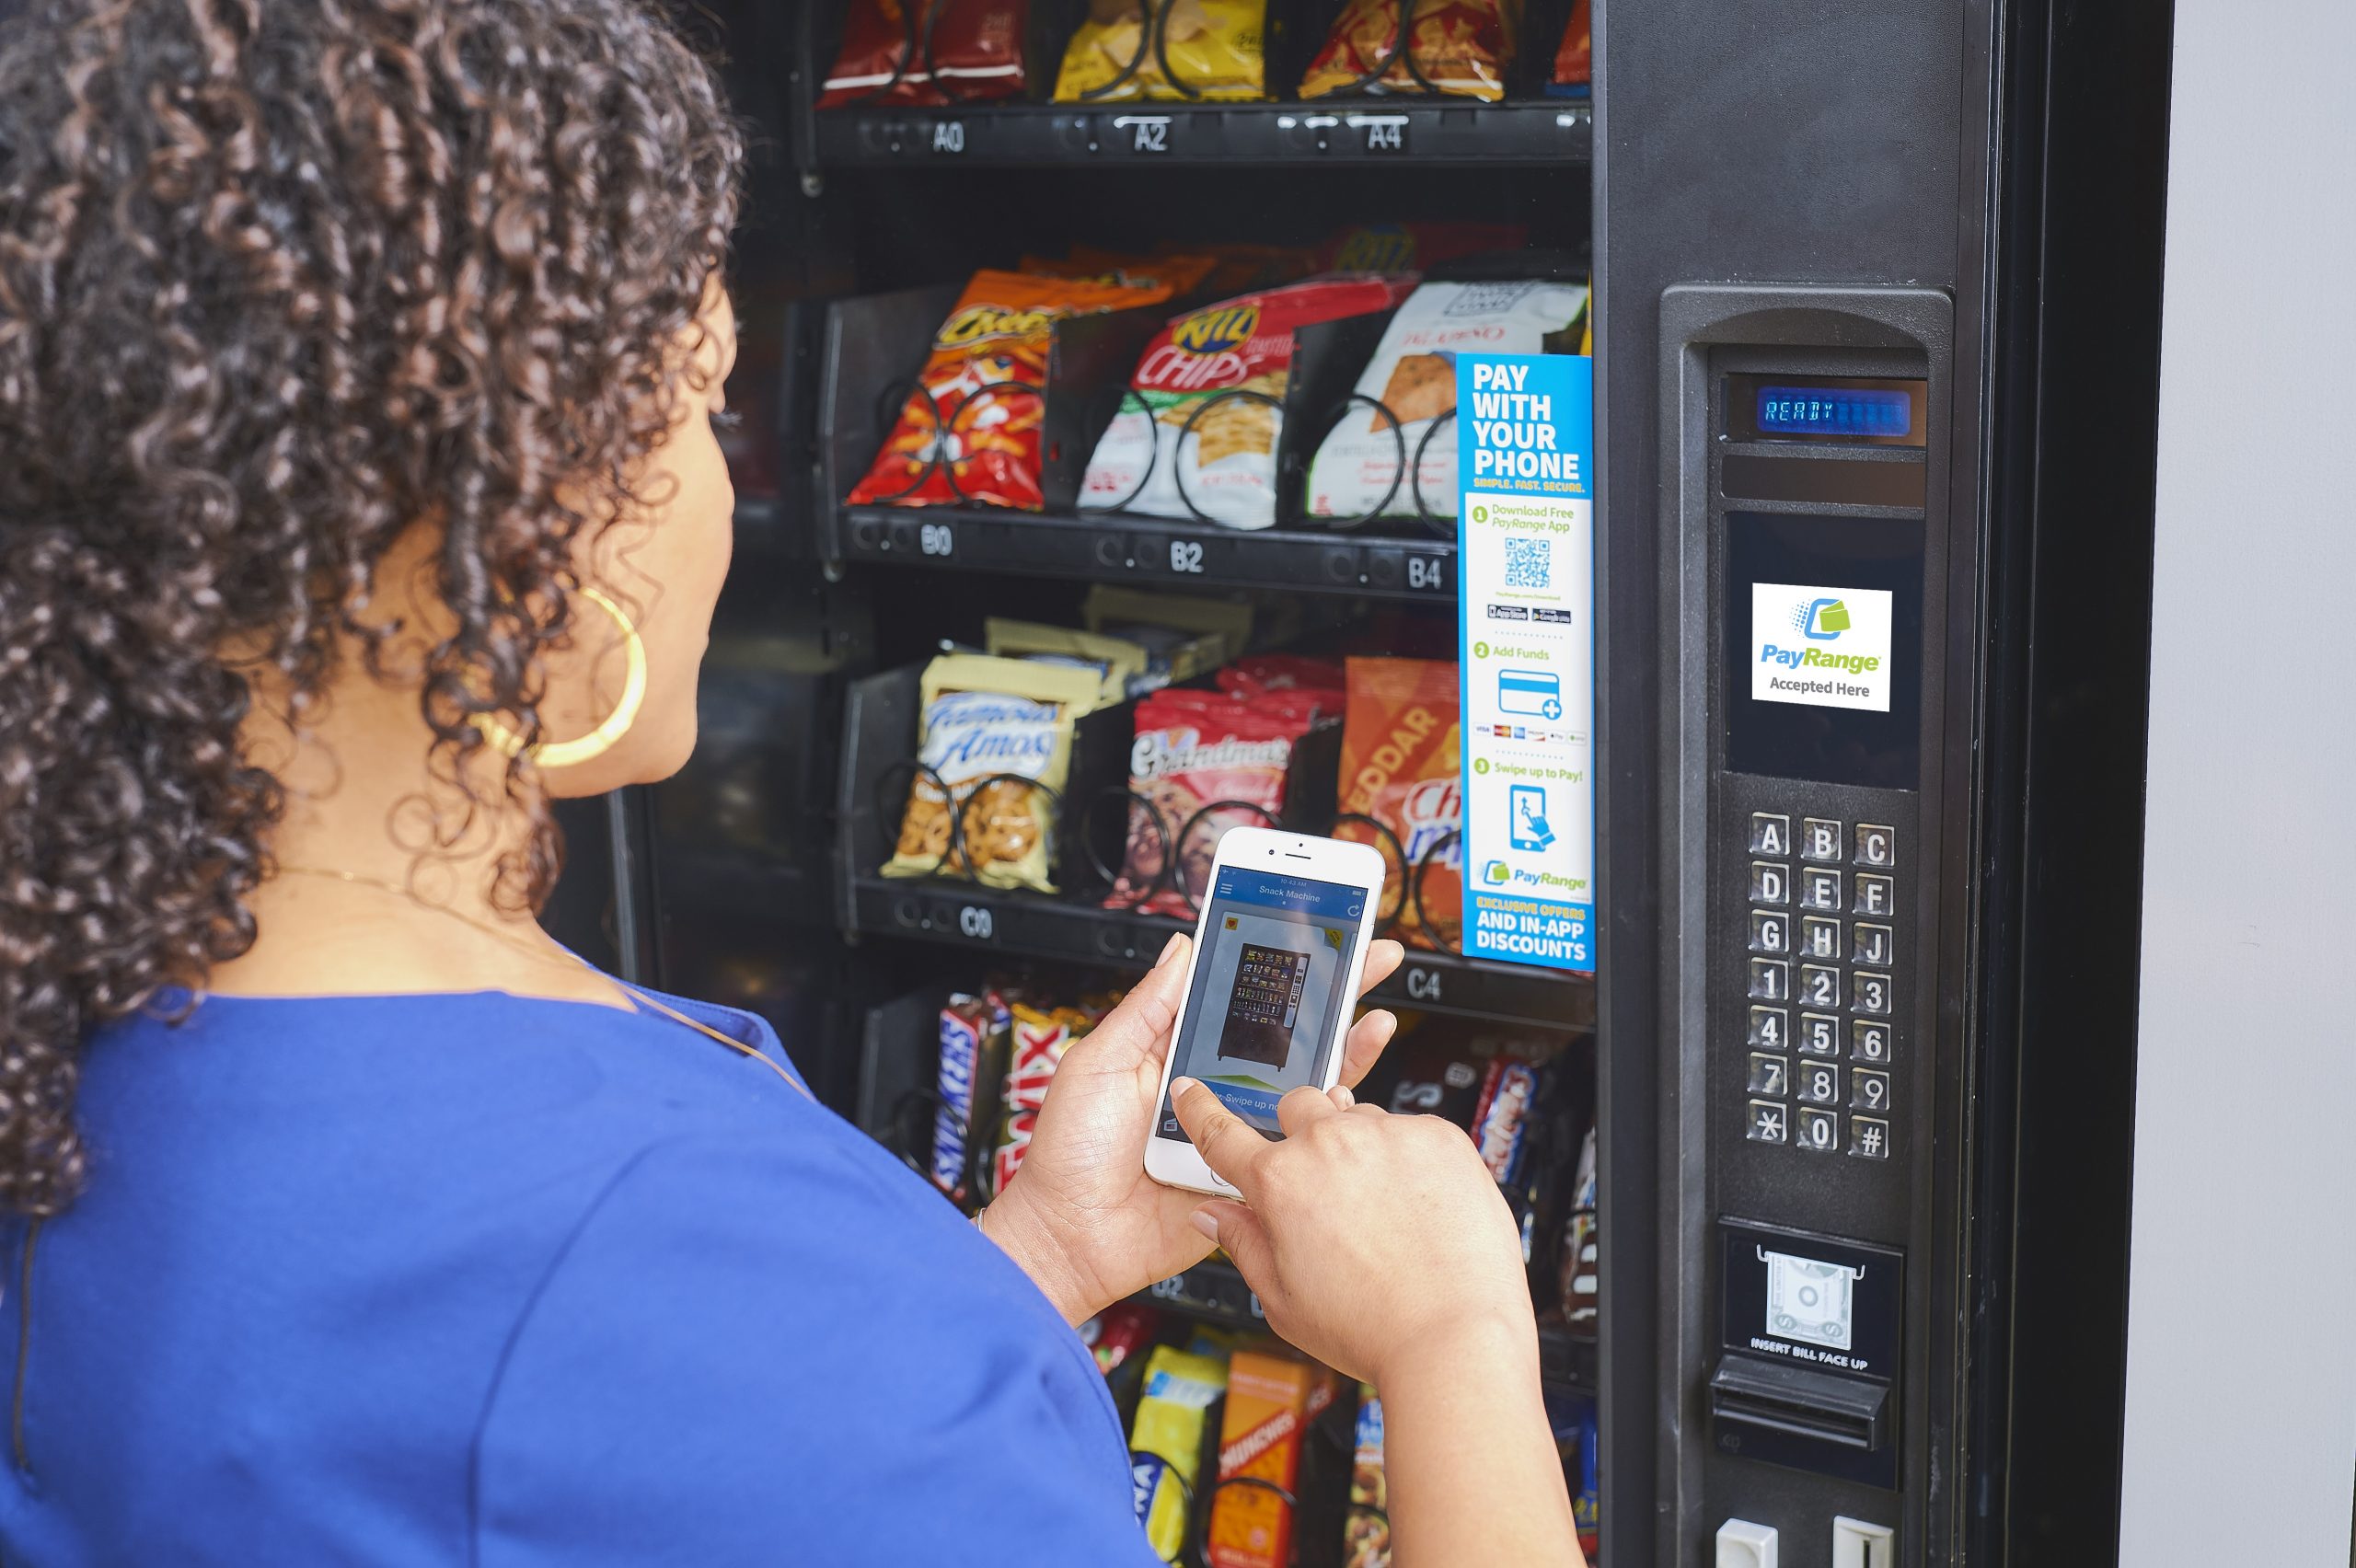 Woman uses Payrange to pay at vending machine with her phone